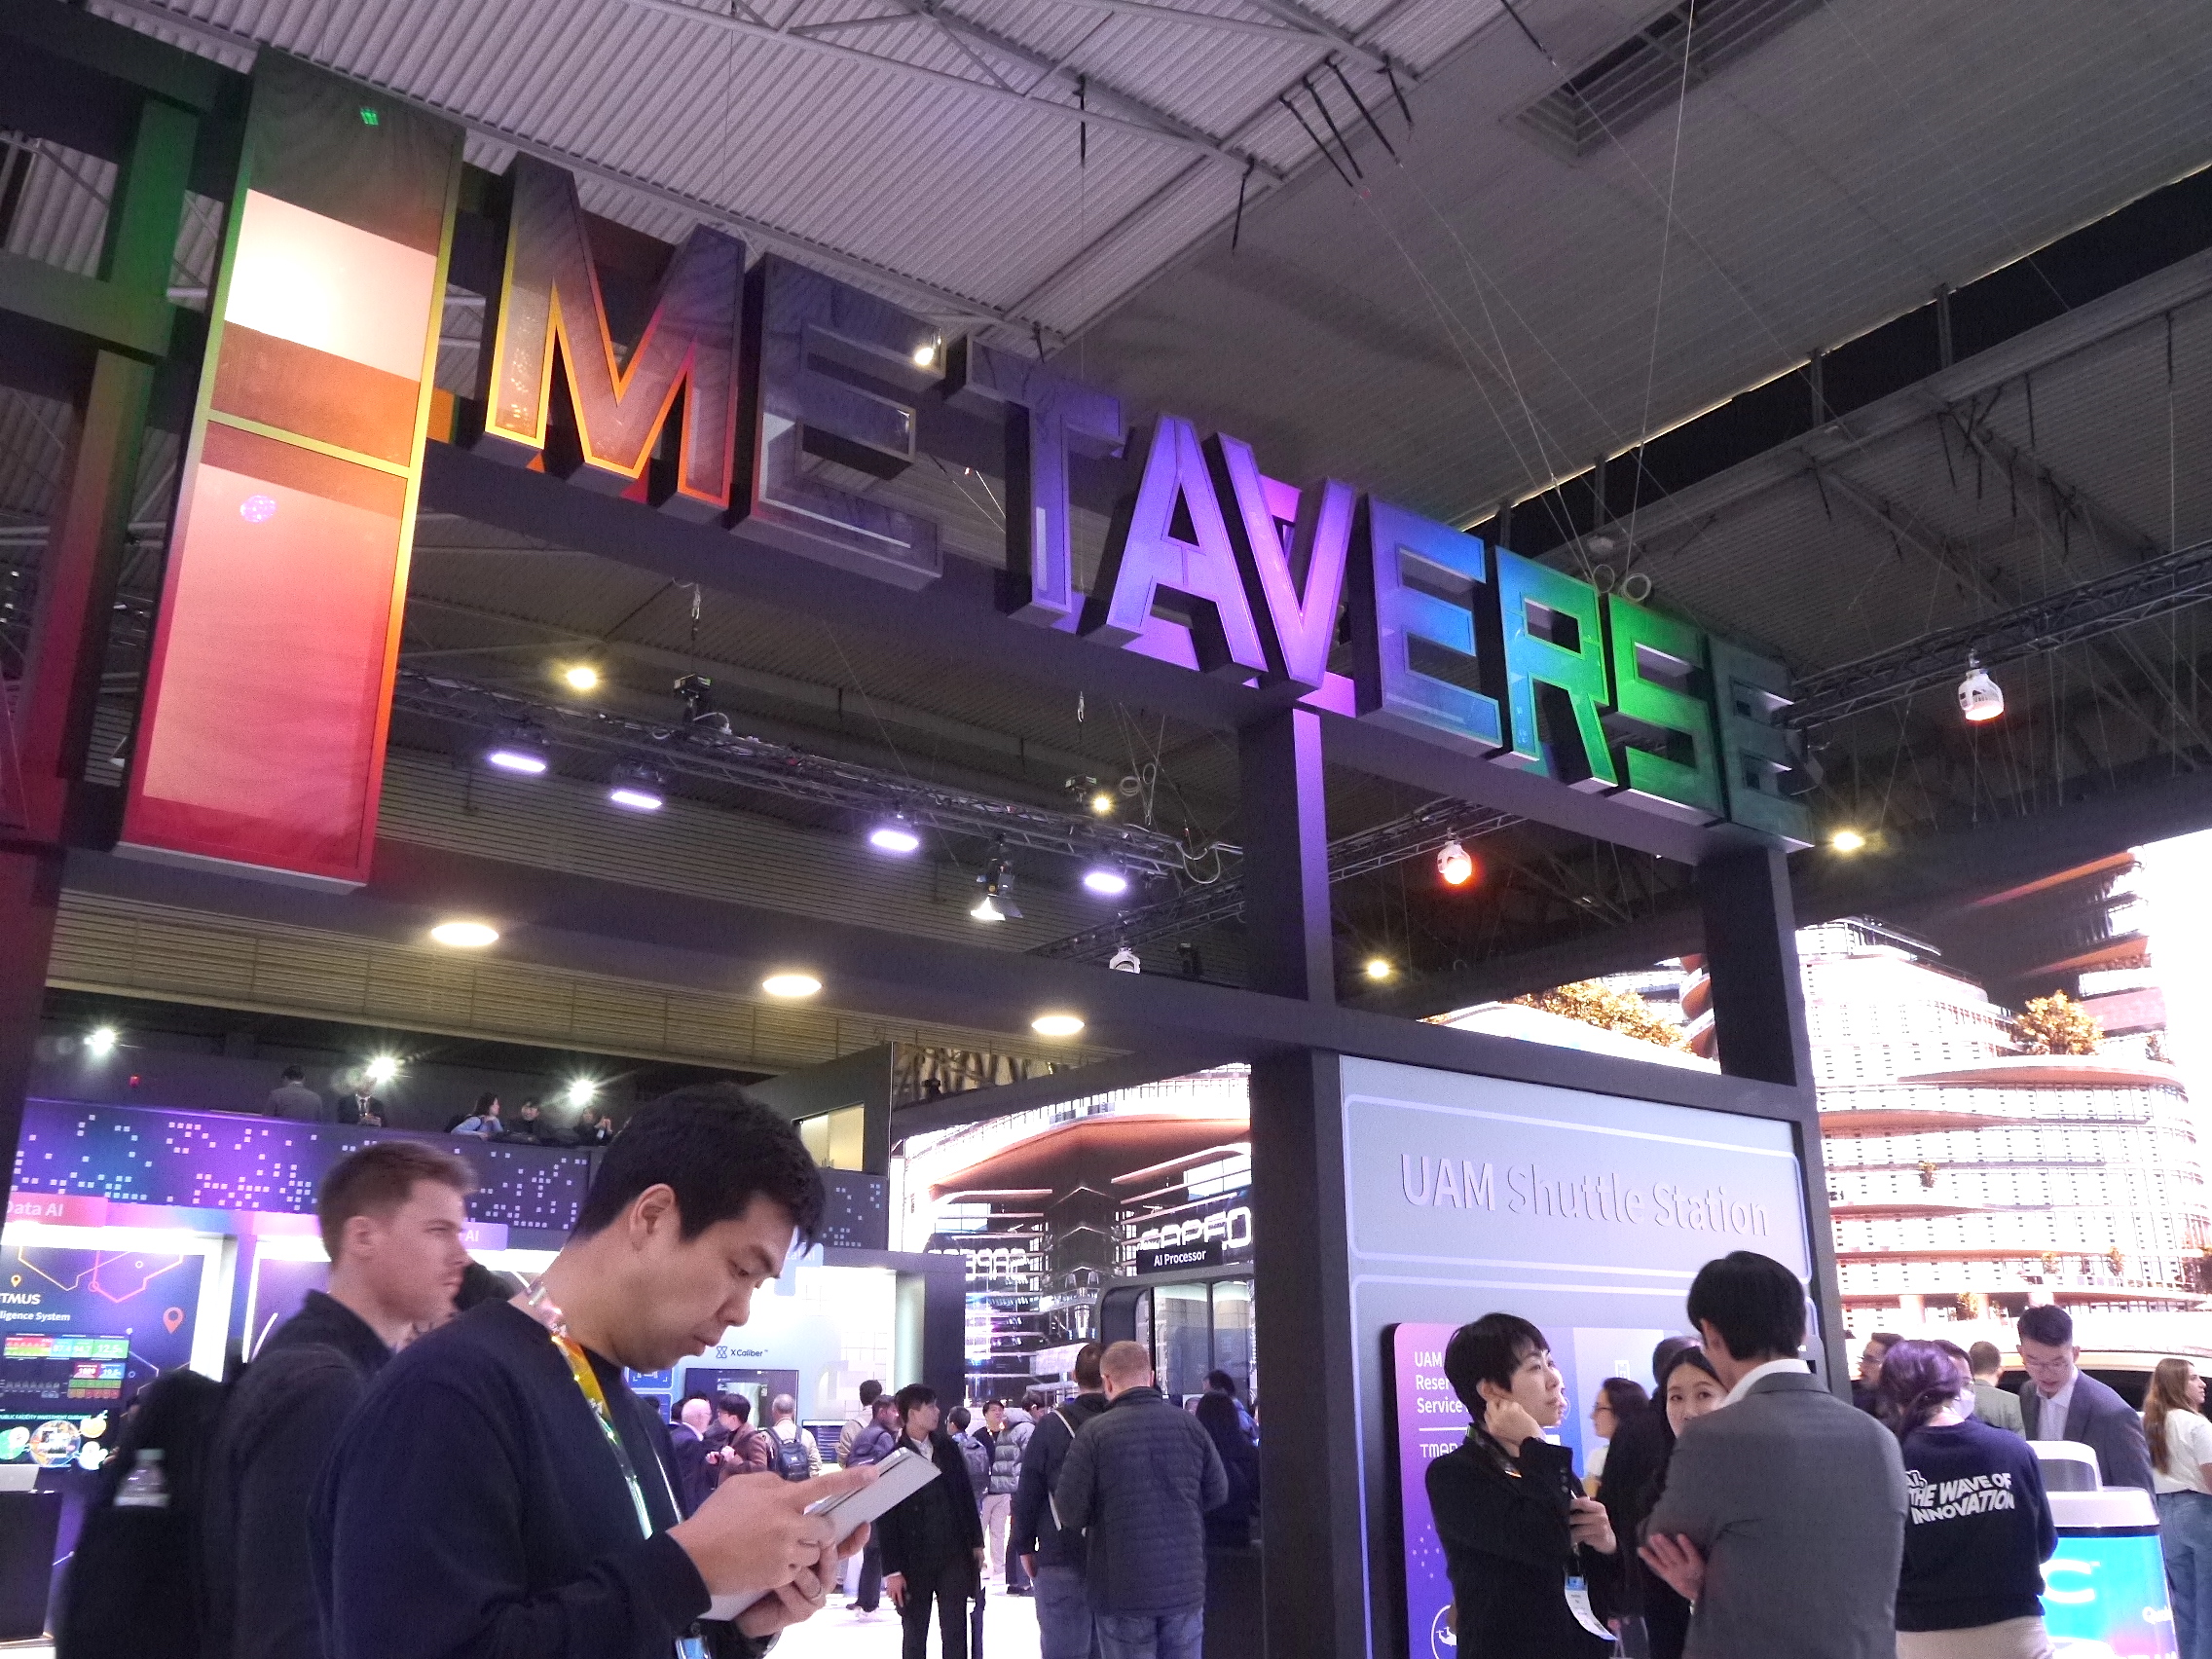 A colorful 'Metaverse' logo is shown atop a booth at the MWC 2023 trade show in Barcelona